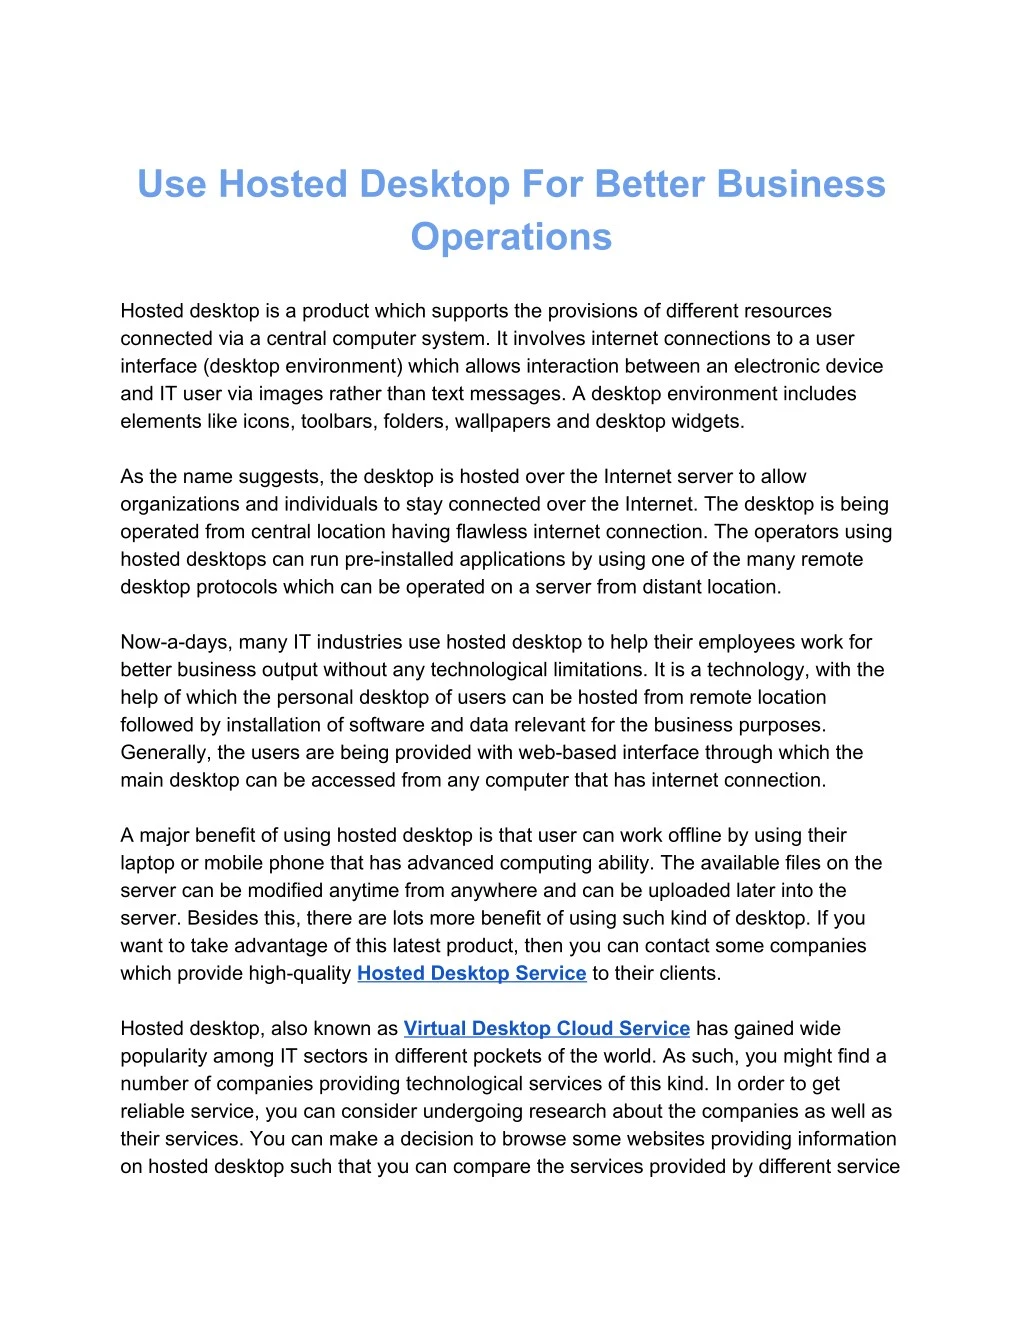 use hosted desktop for better business operations